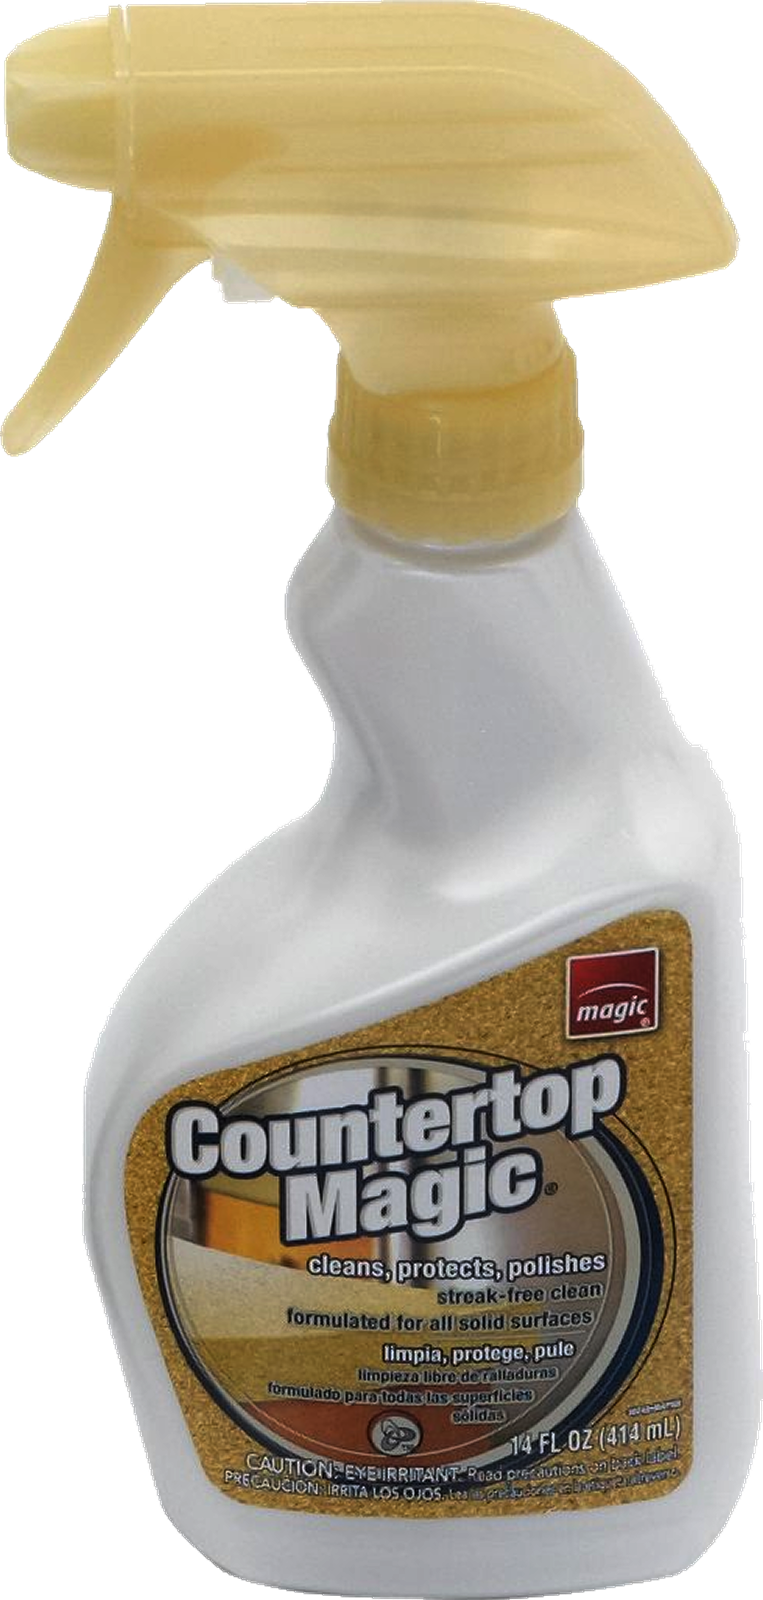 https://www.topclasscarpentry.com/images/cleaning-products/countertop-magic-worktop-cleaner.png